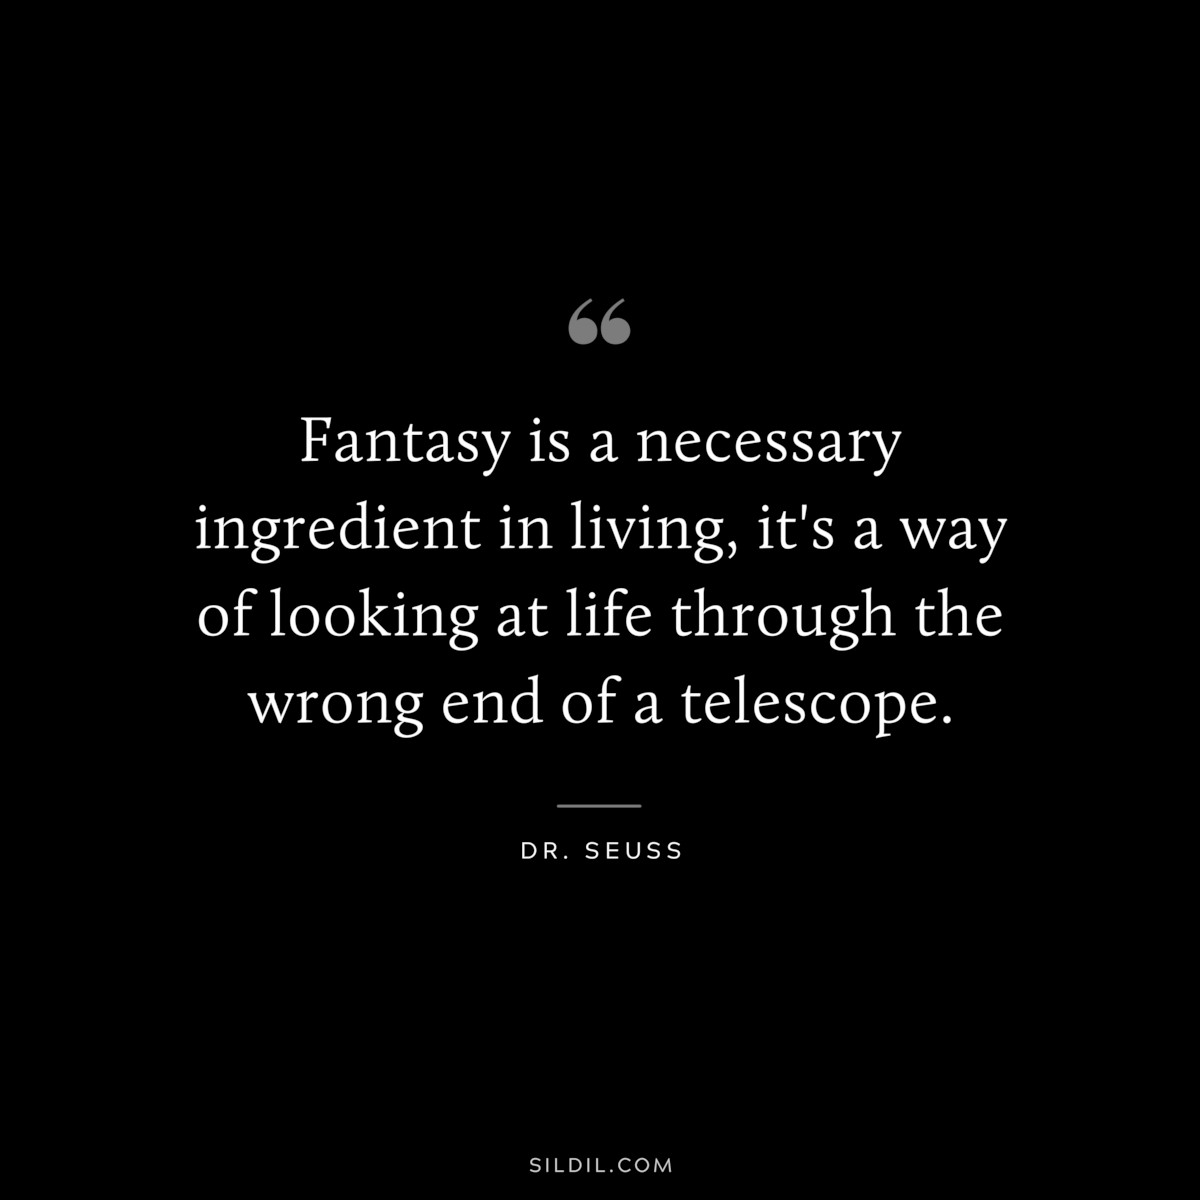 Fantasy is a necessary ingredient in living, it's a way of looking at life through the wrong end of a telescope. ― Dr. Seuss